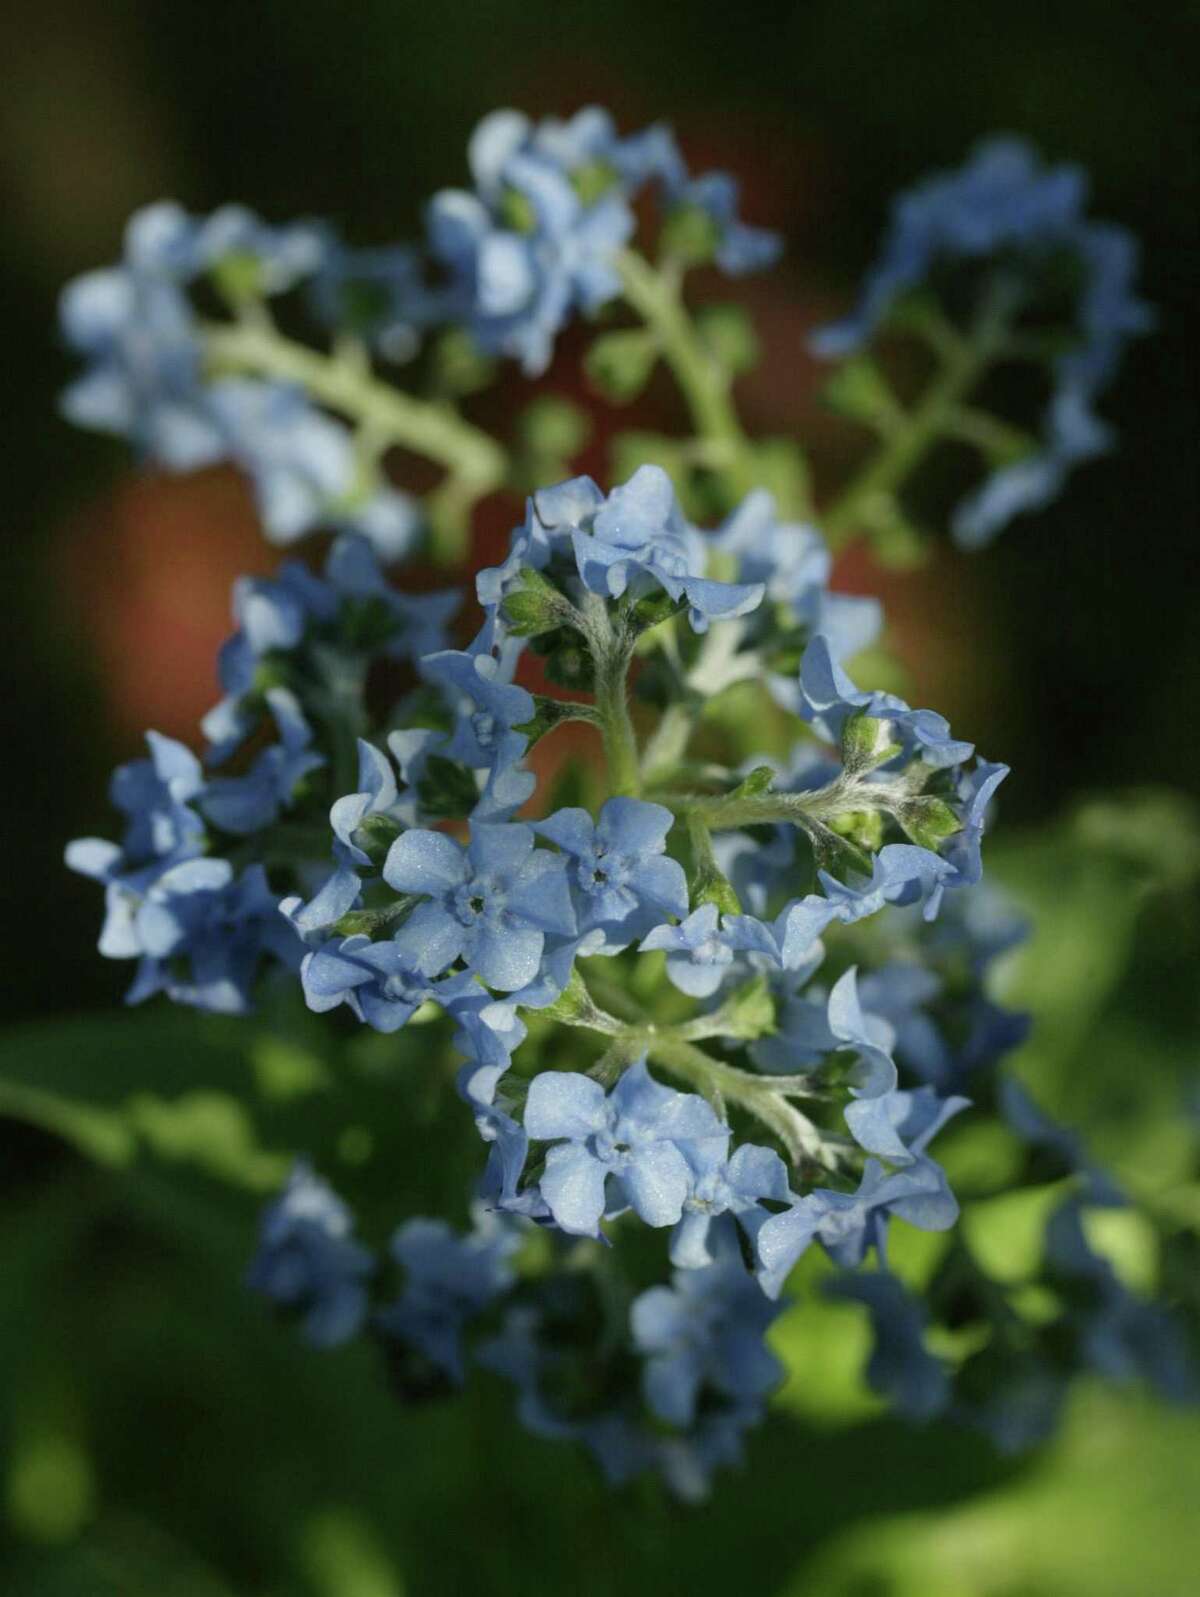 Forget Me Nots are a small, colorful bloom